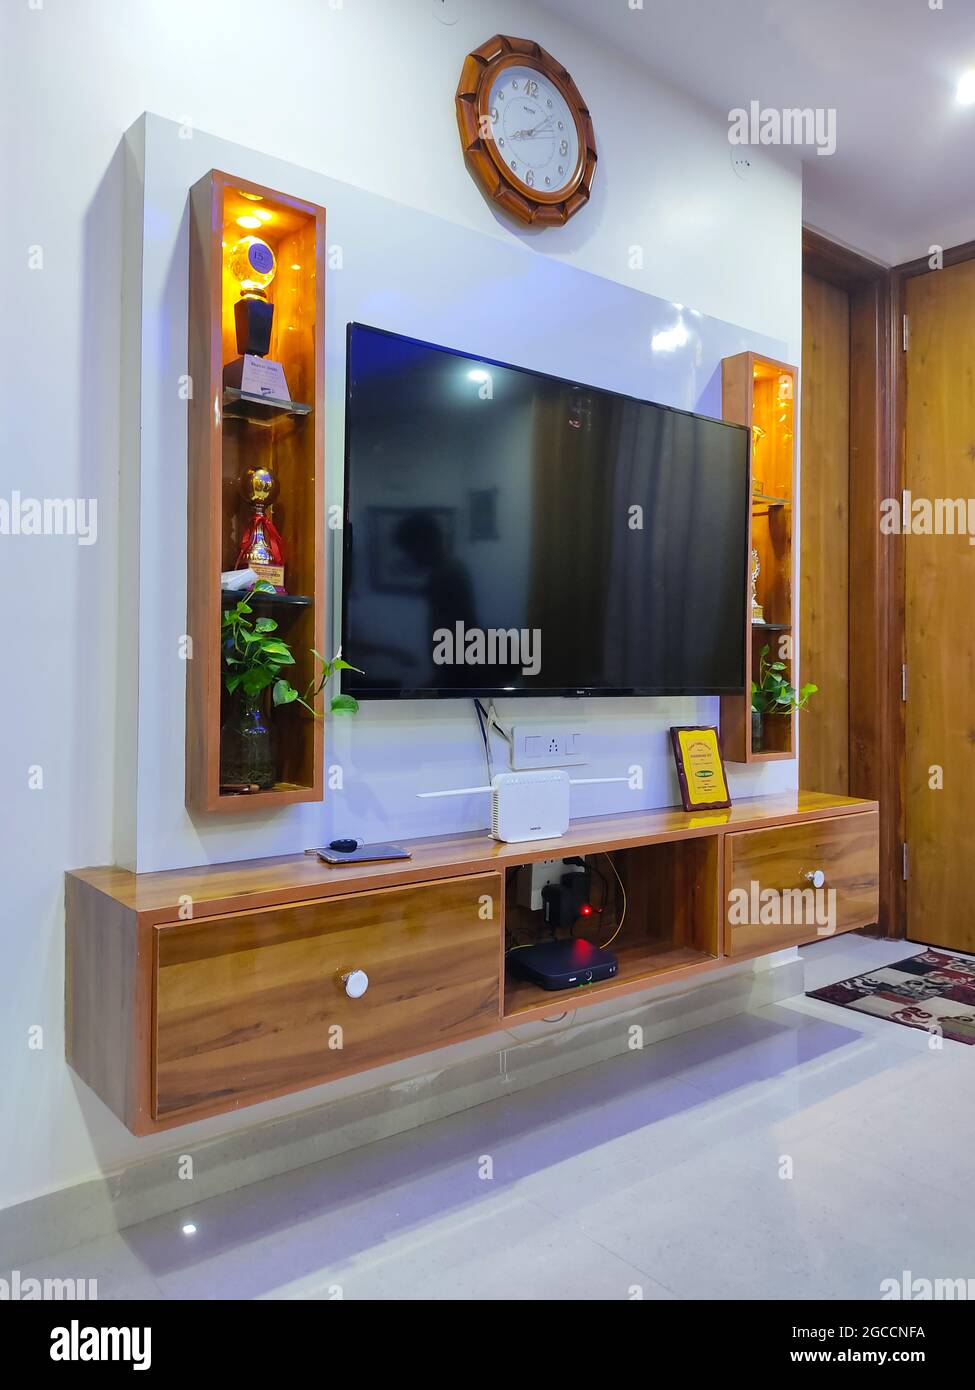 Wall Hanging Television Showcase Cabinet with Wooden Panel, Shelving Racks display and drawer. Home Interior. Stock Photo